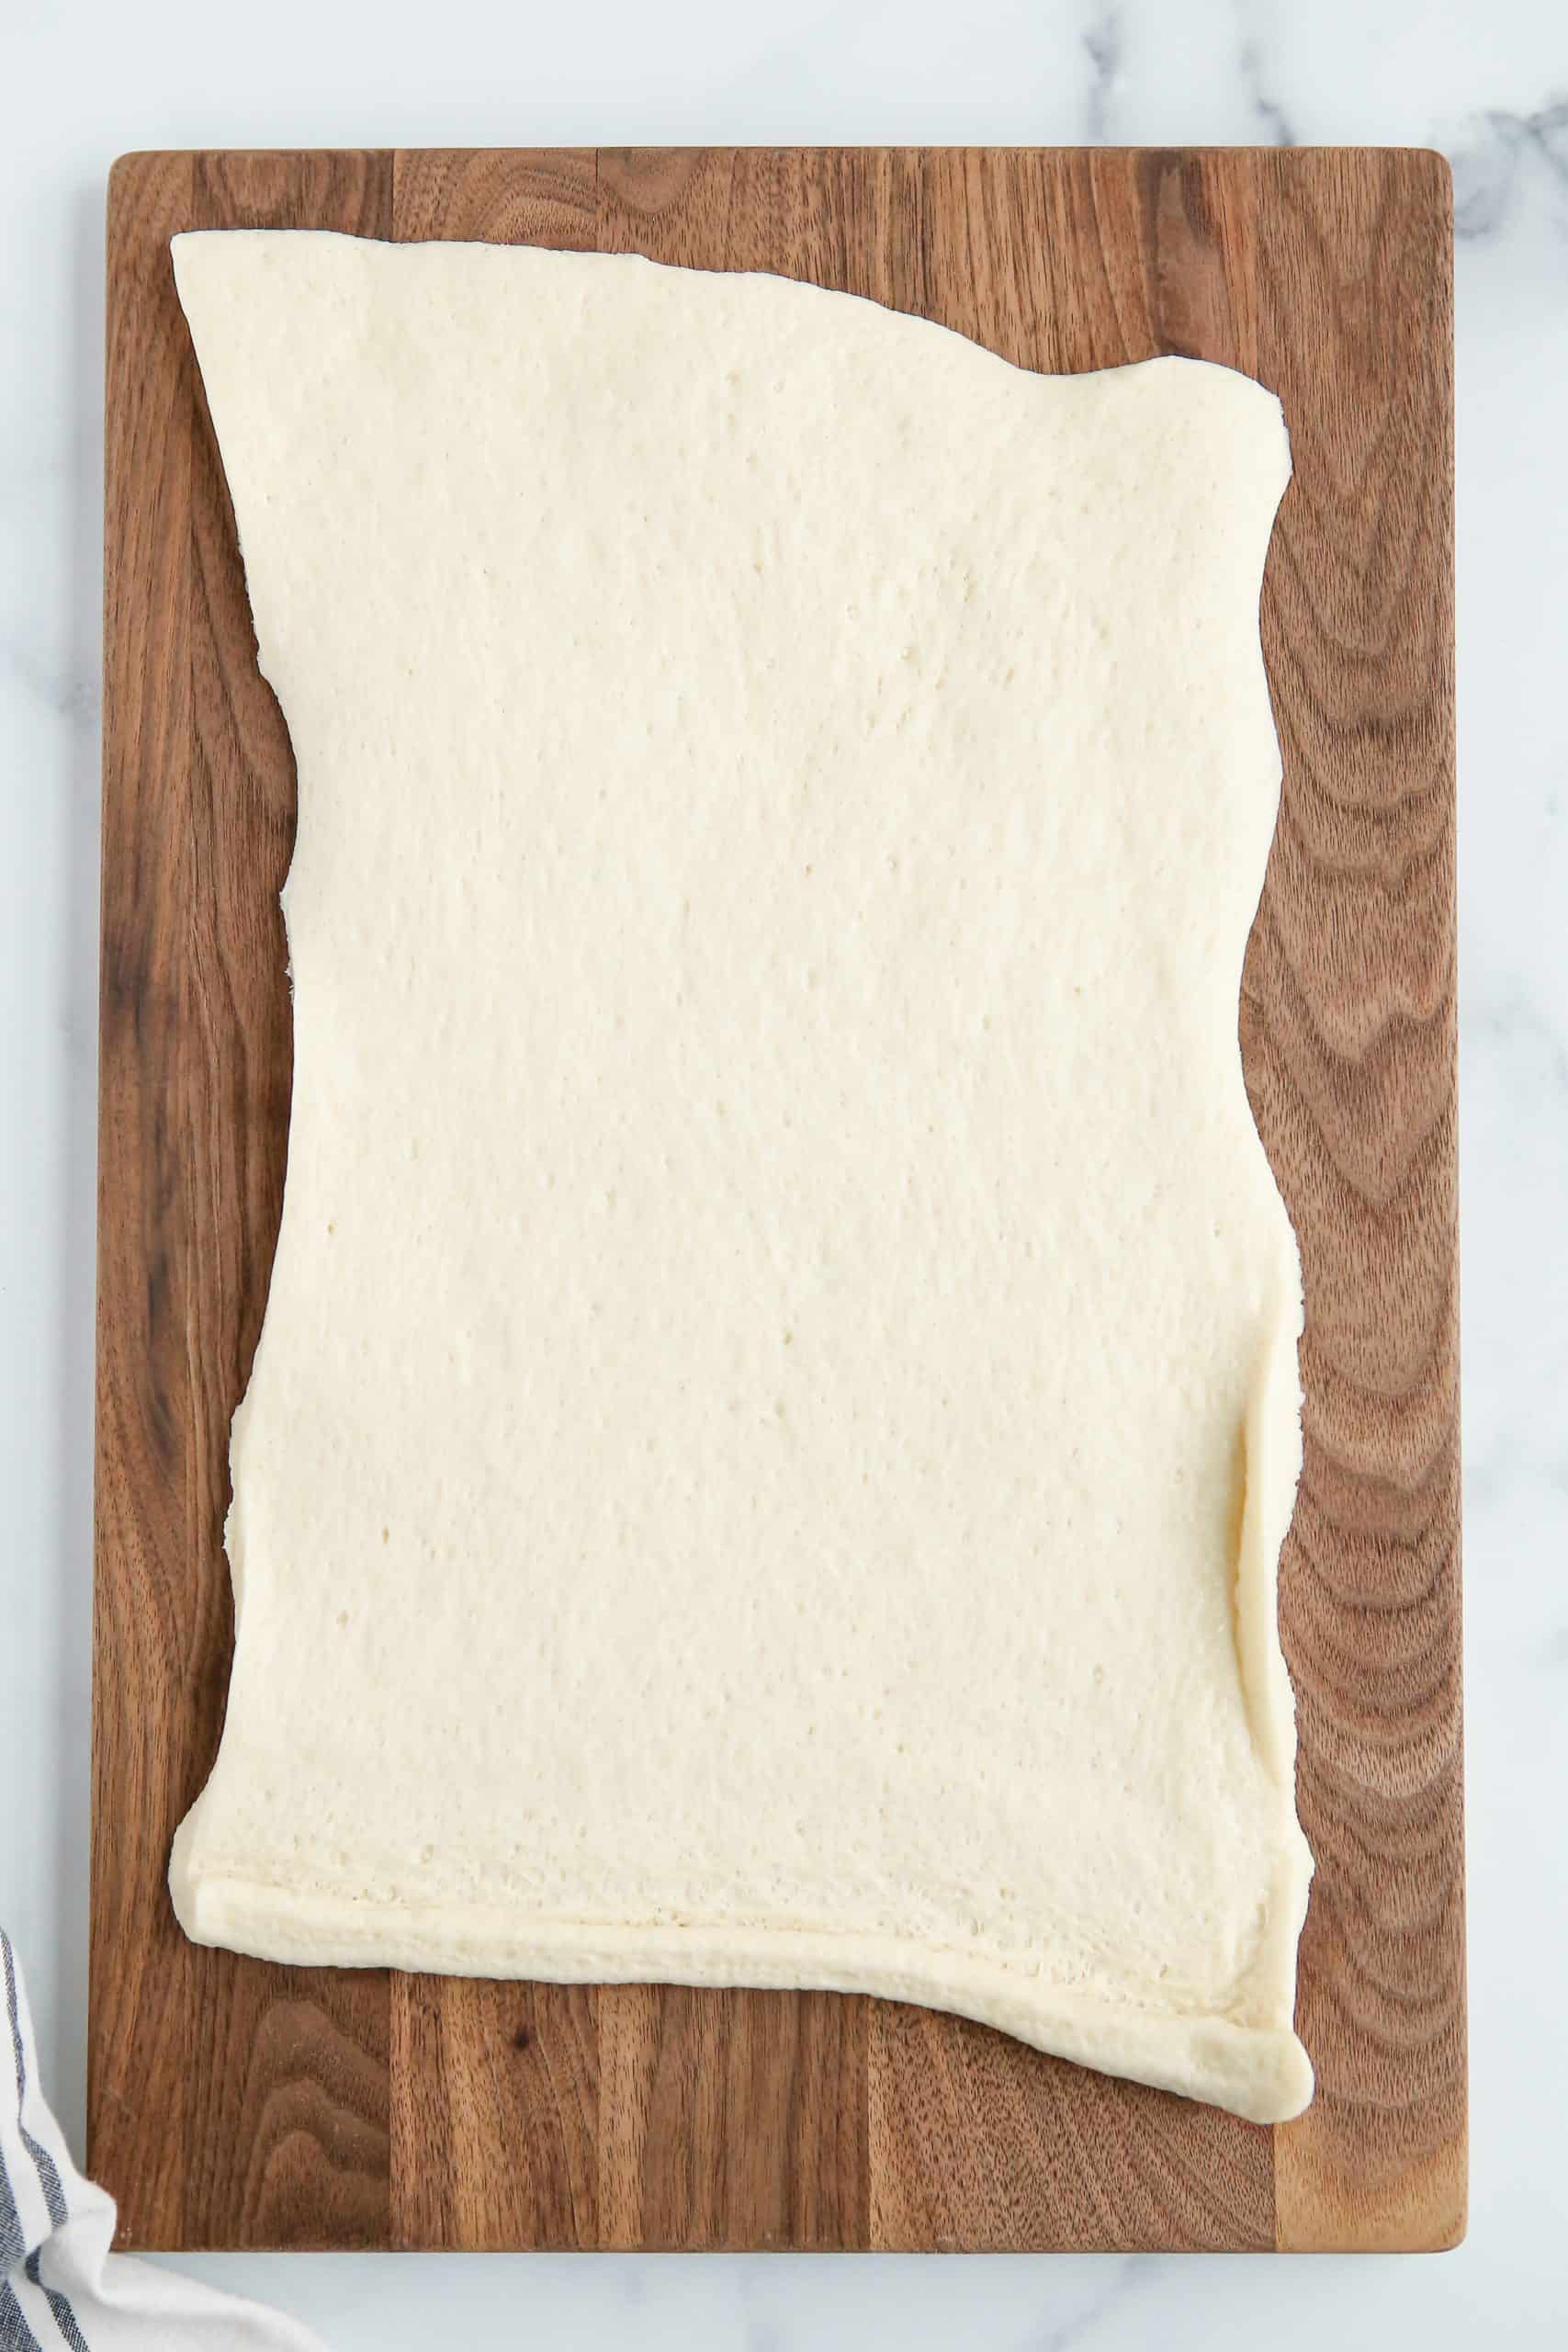 Rolled out dough on cutting board.